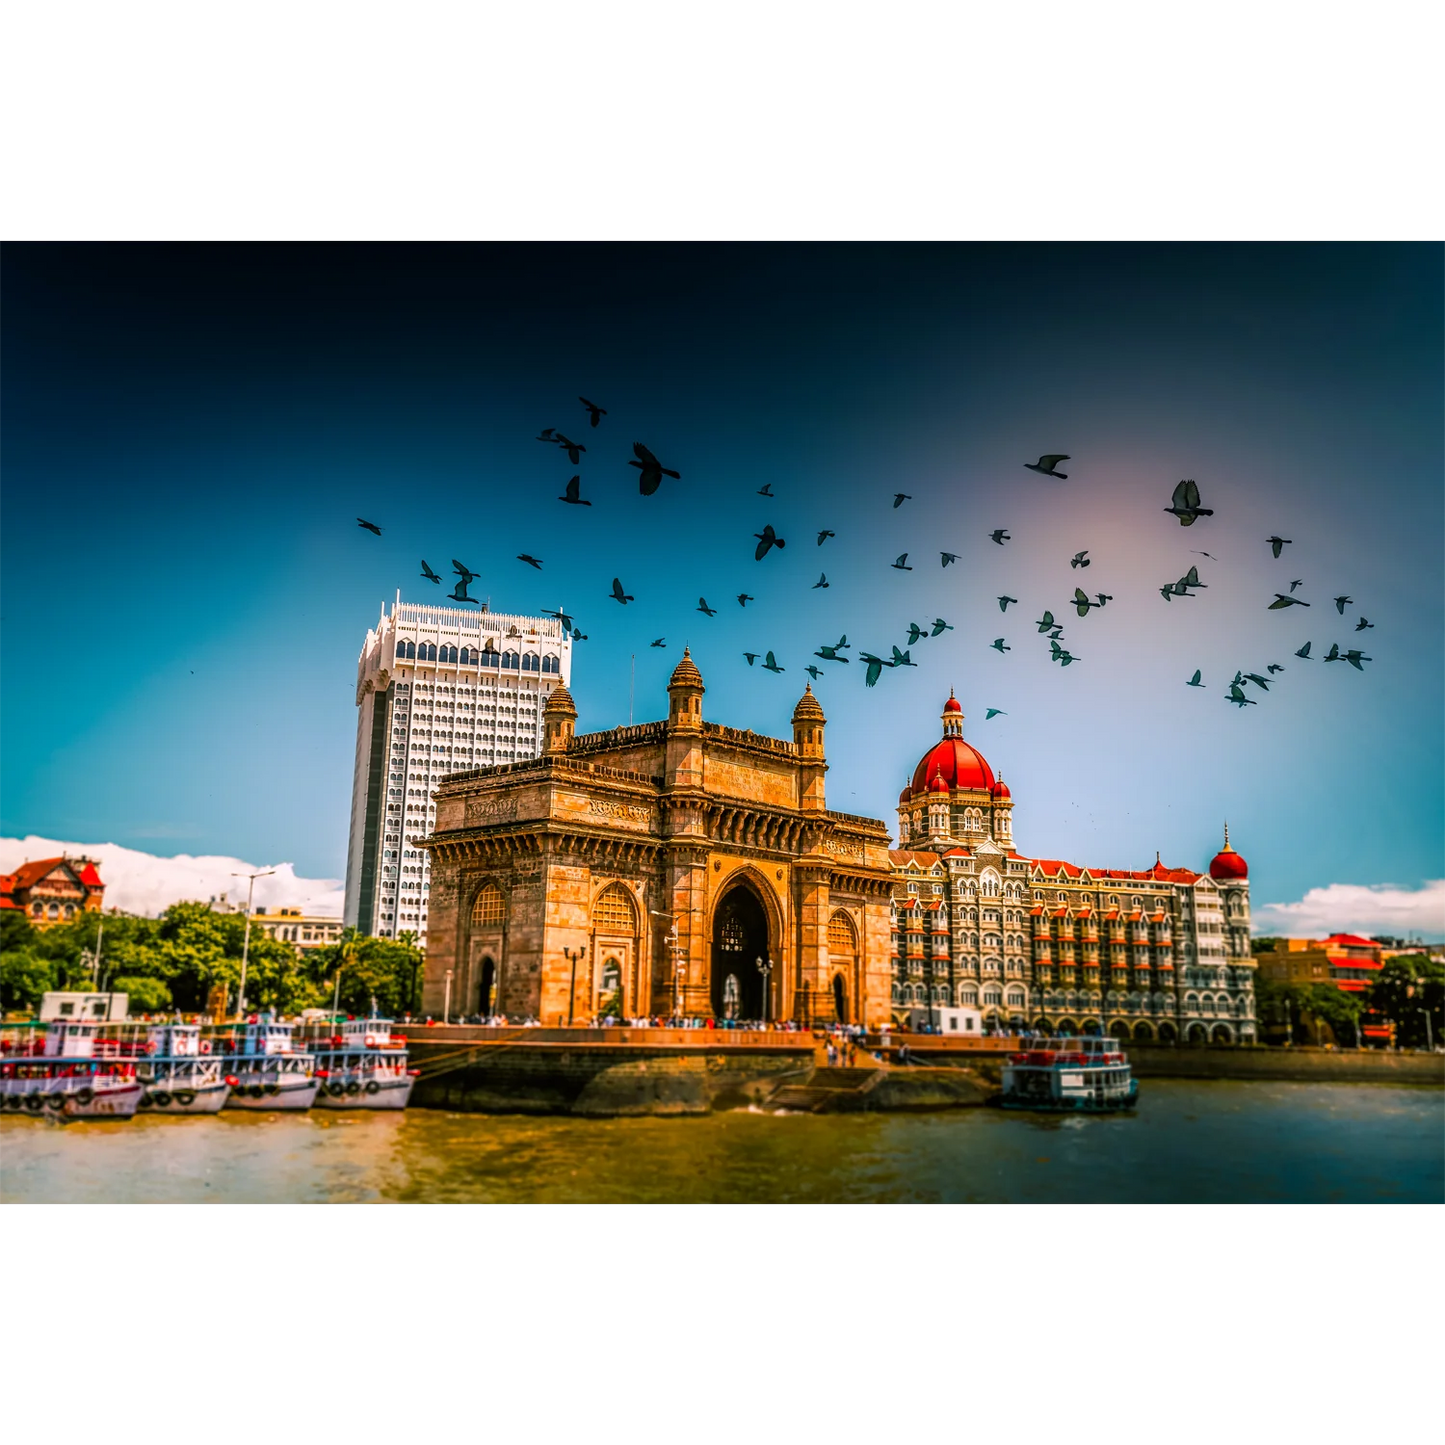 HD Quality Wallpaper of Gateway of India with Flying Birds